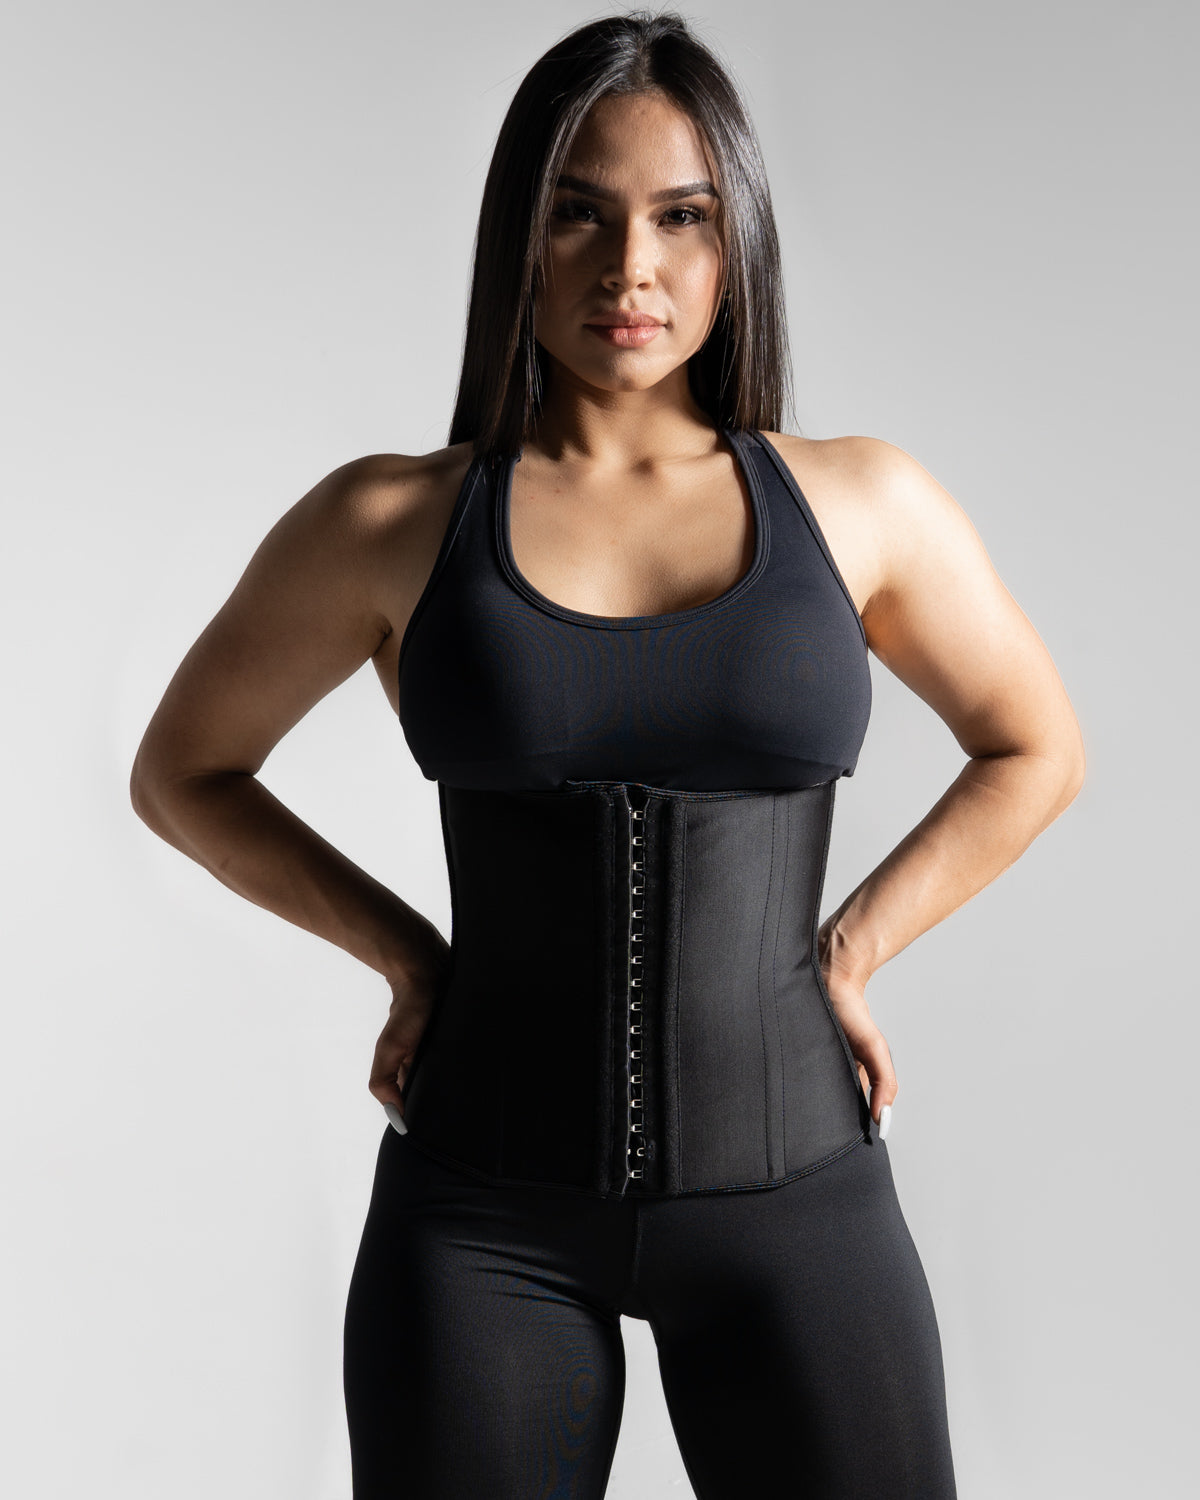 Queenral Push Up Slimming Waist Trainer Sexy Modeling Strap Corsets Black  Clothing, Shoes & Jewelry